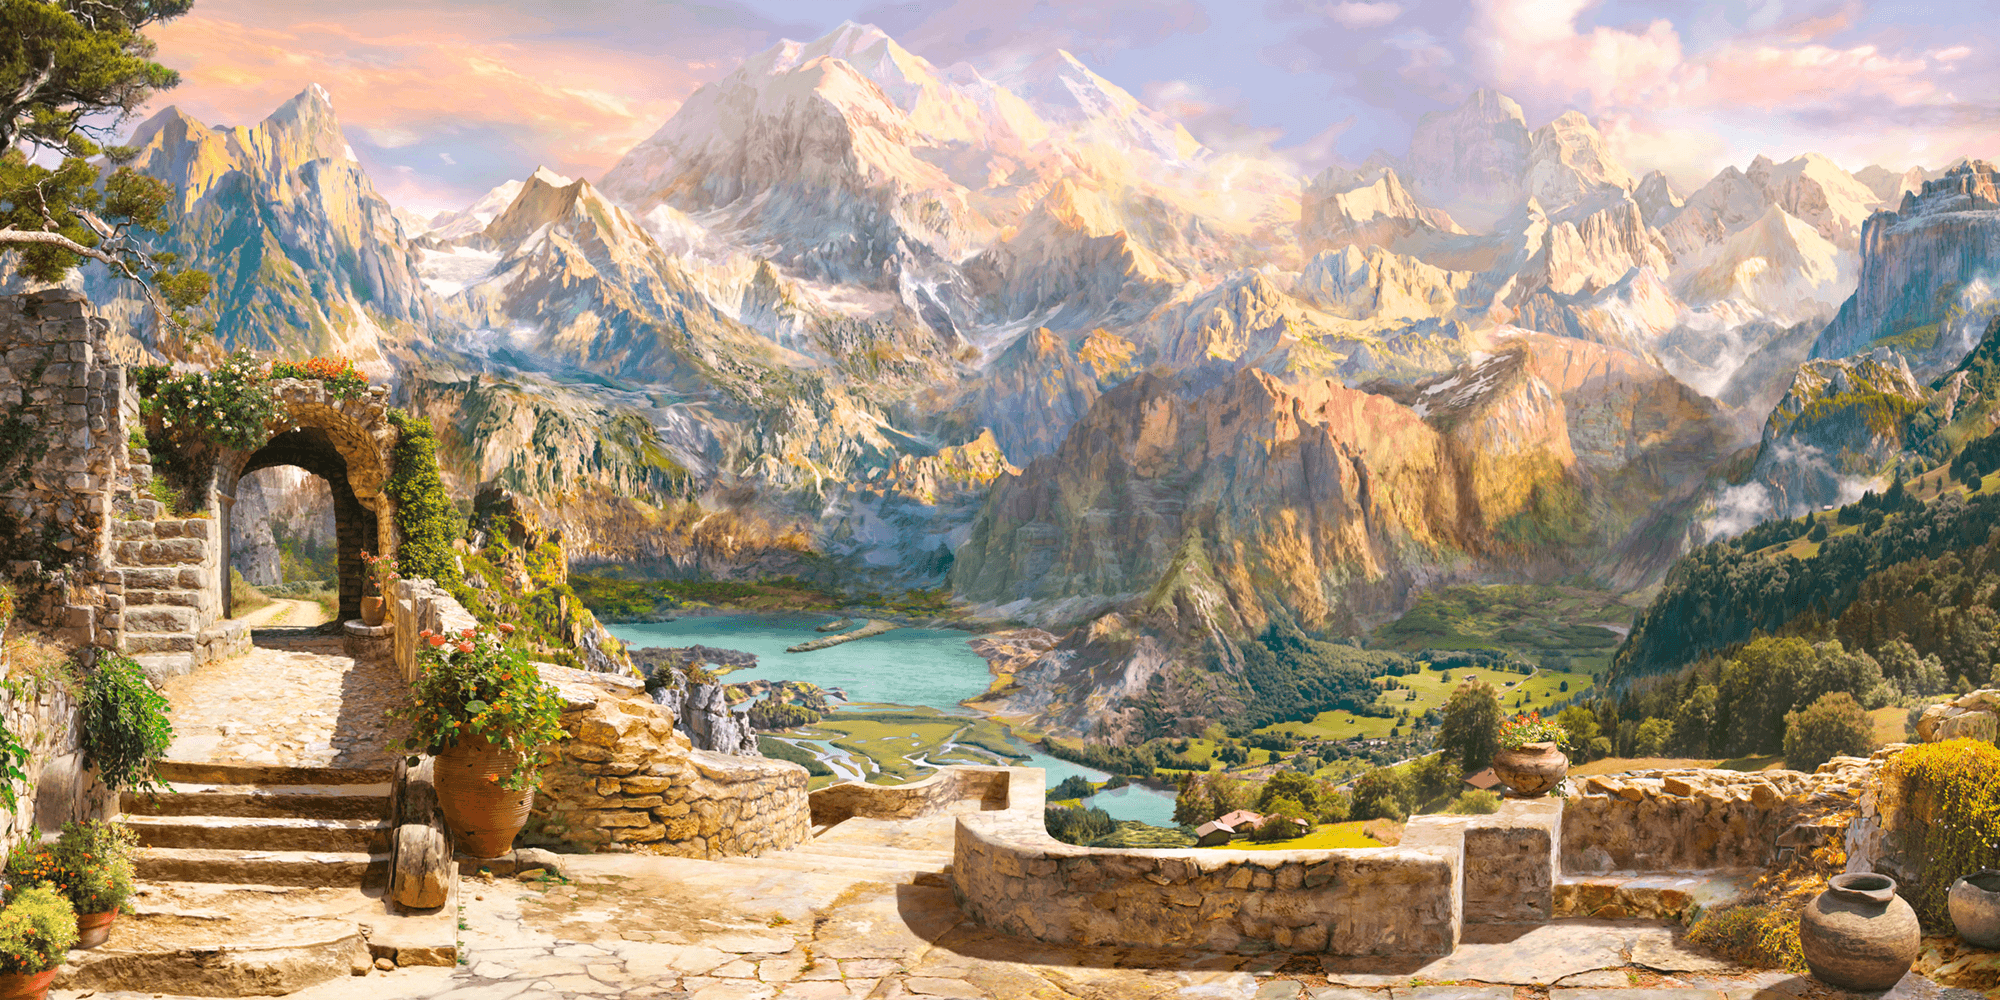 Wall Murals: The mountains of the lake